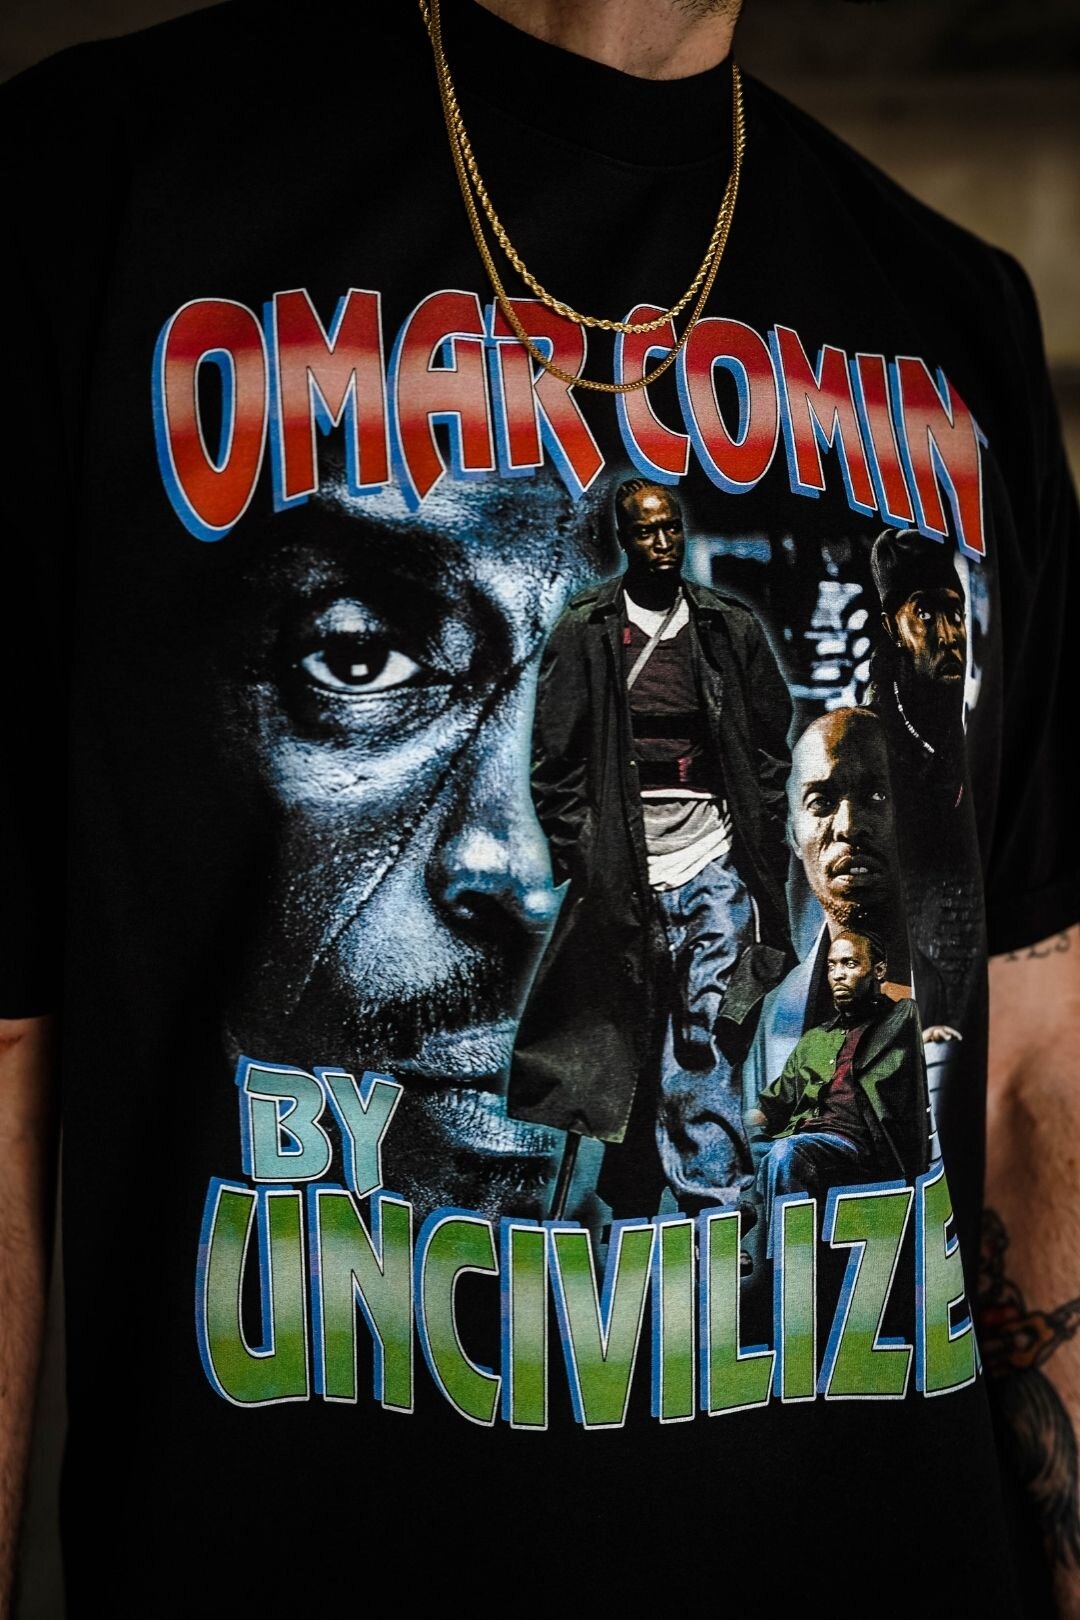 EARLY ACCESS: "OMAR COMIN'" T-SHIRT BY UNCIVILIZED